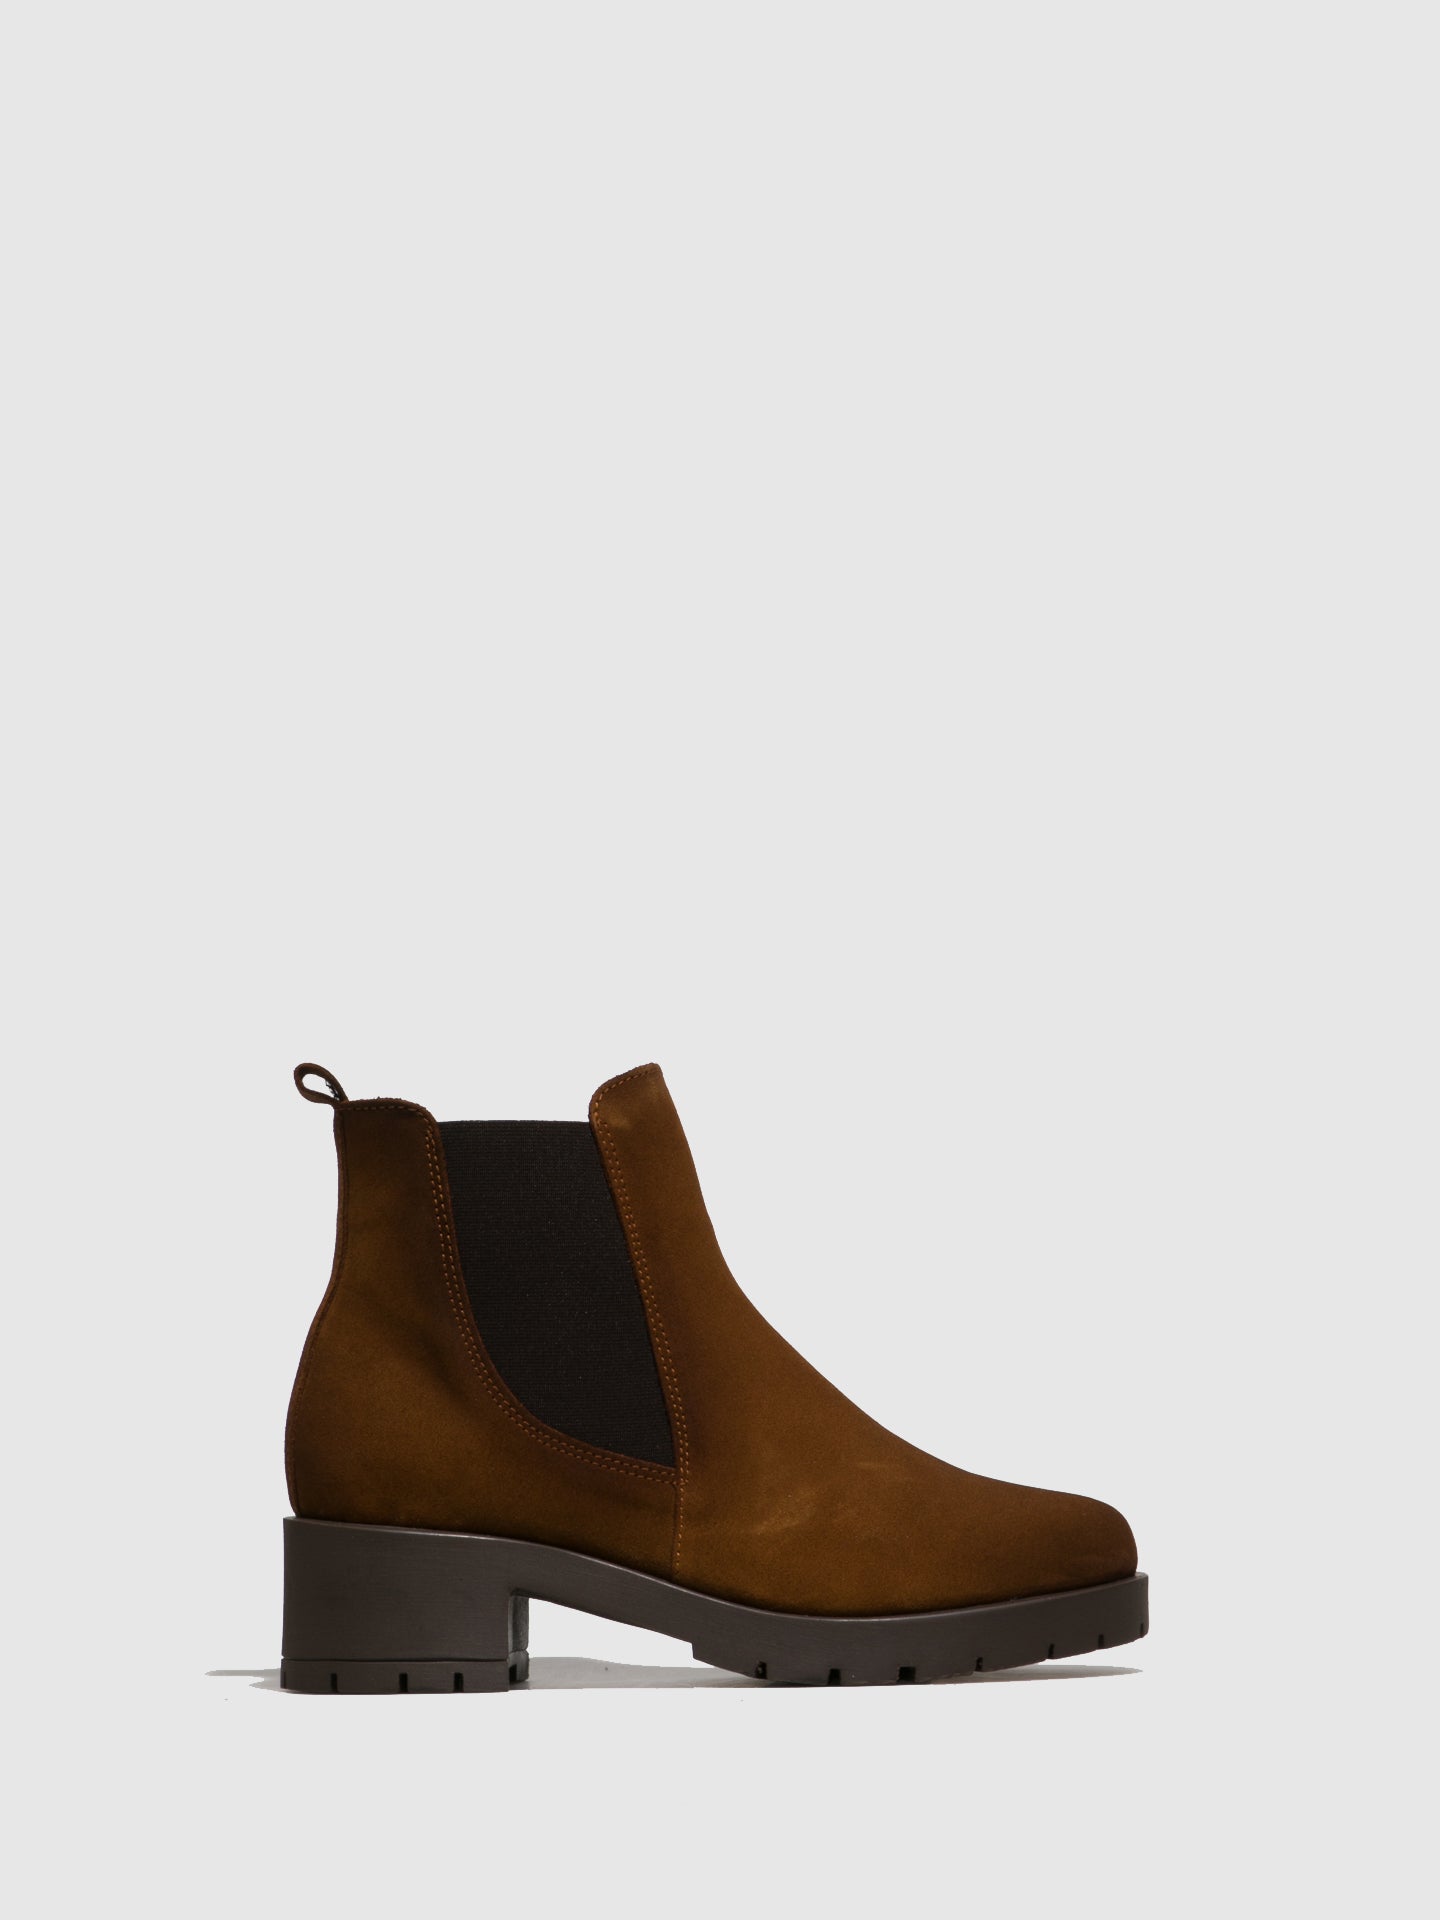 Foreva Camel Chelsea Ankle Boots